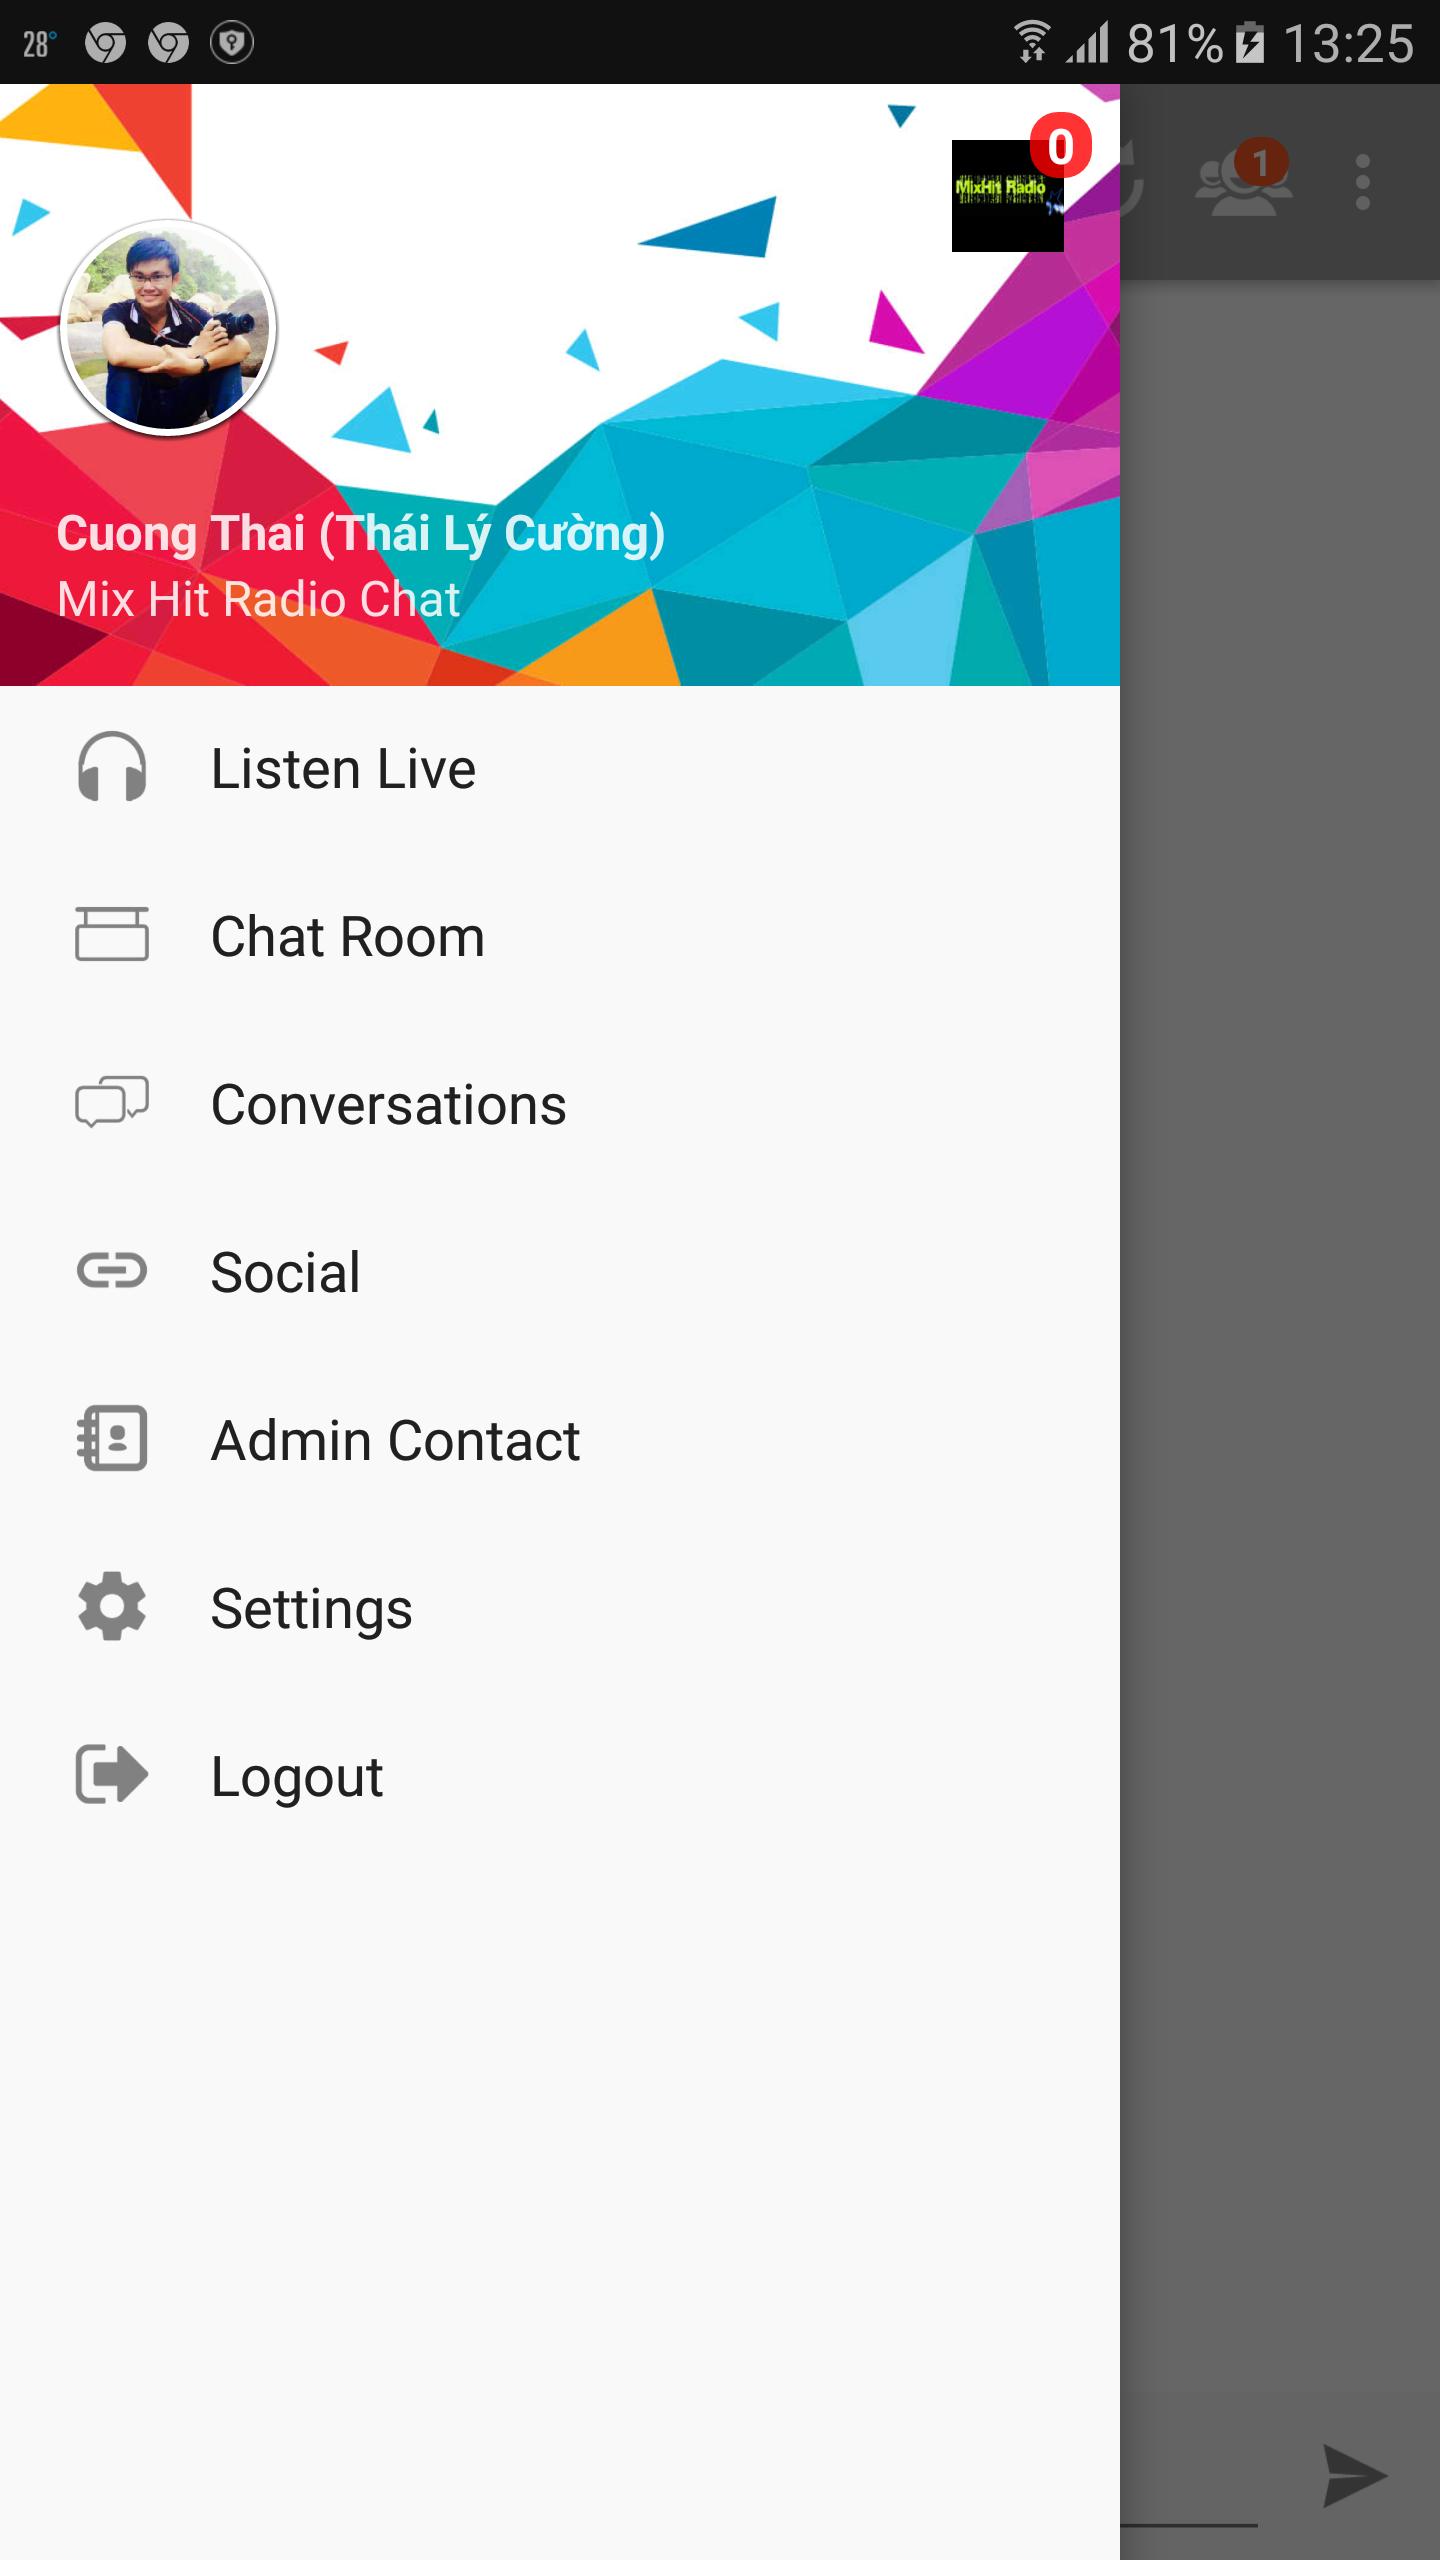 Mix Hit Radio Chat for Android - APK Download